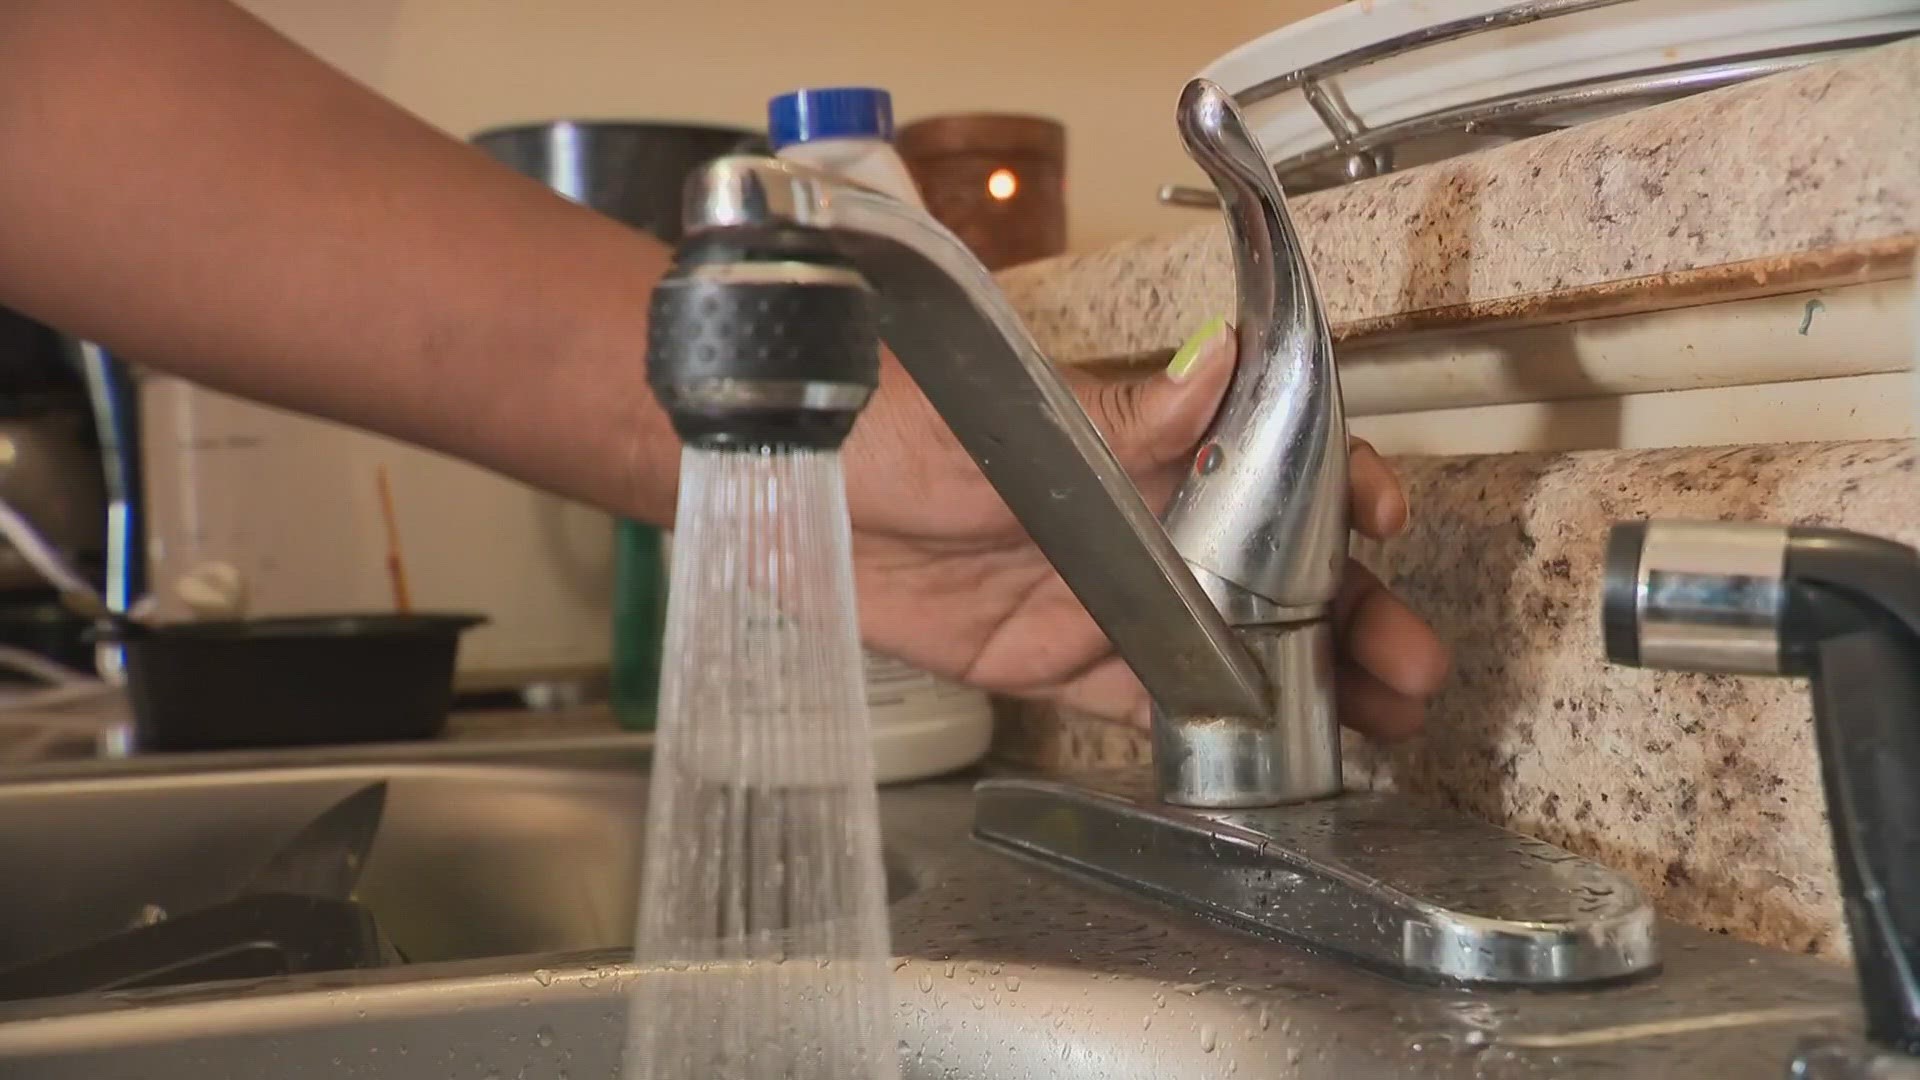 The City of Phoenix is hosting a public forum for the community to share their thoughts on a possible water bill rate hike. Jade Cunningham has more.